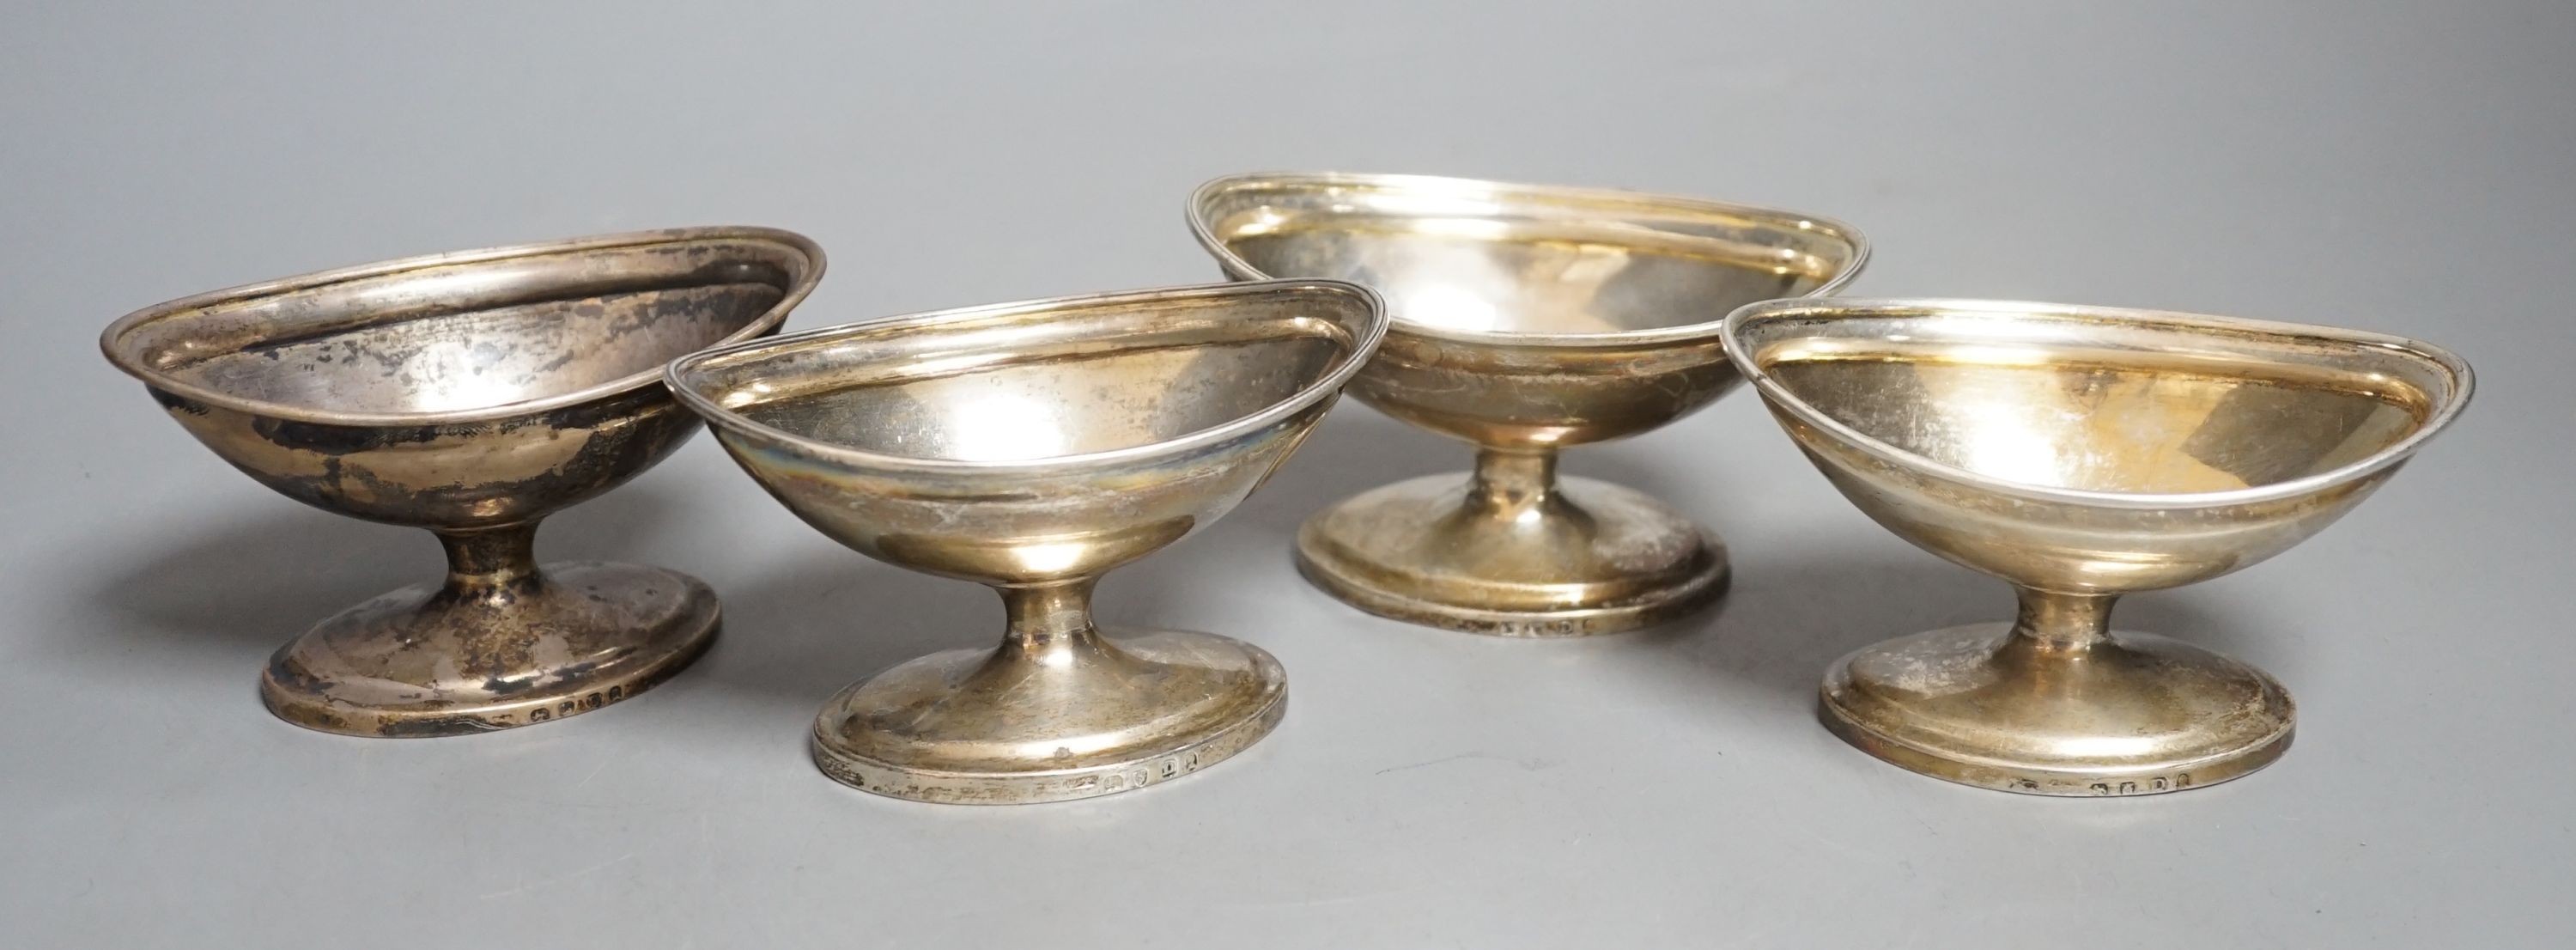 A set of four George III silver boat shaped pedestal salts, London, 1799, maker's mark rubbed, length 10cm, 345 grams.                                                                                                      